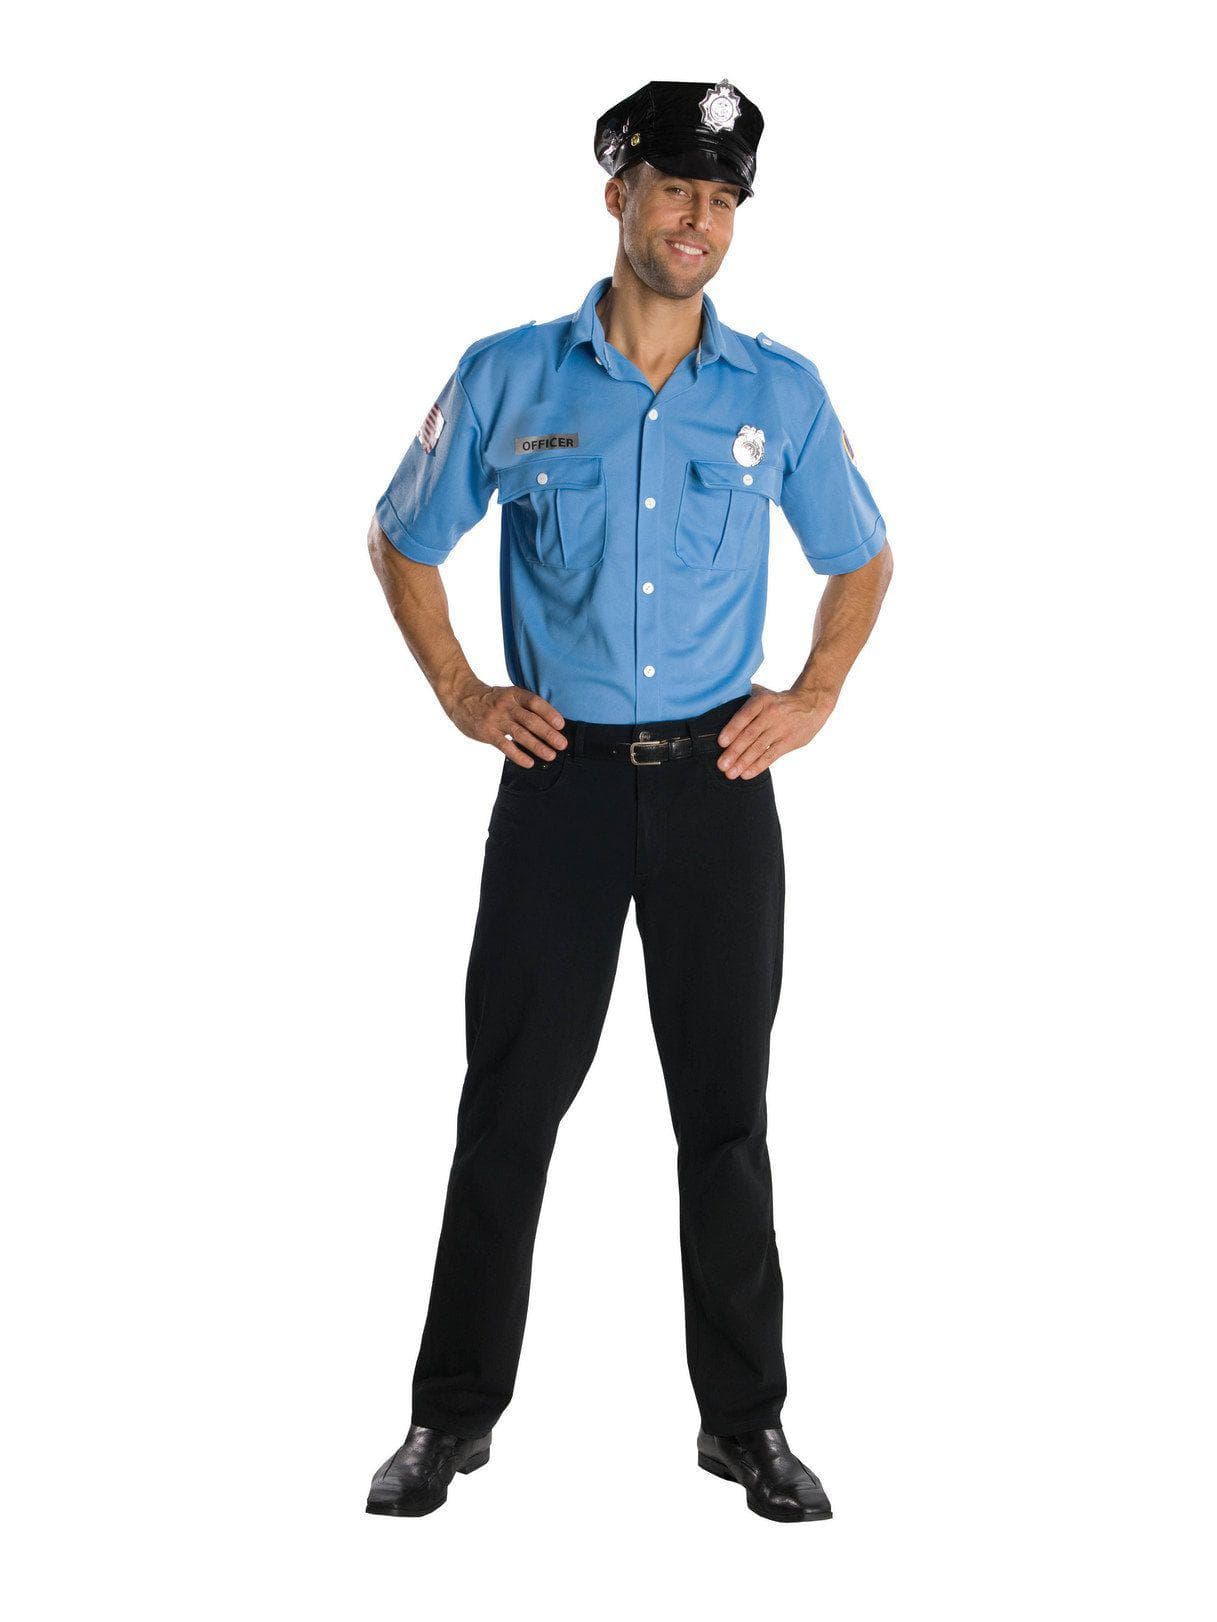 Adult Police Officer Costume - costumes.com